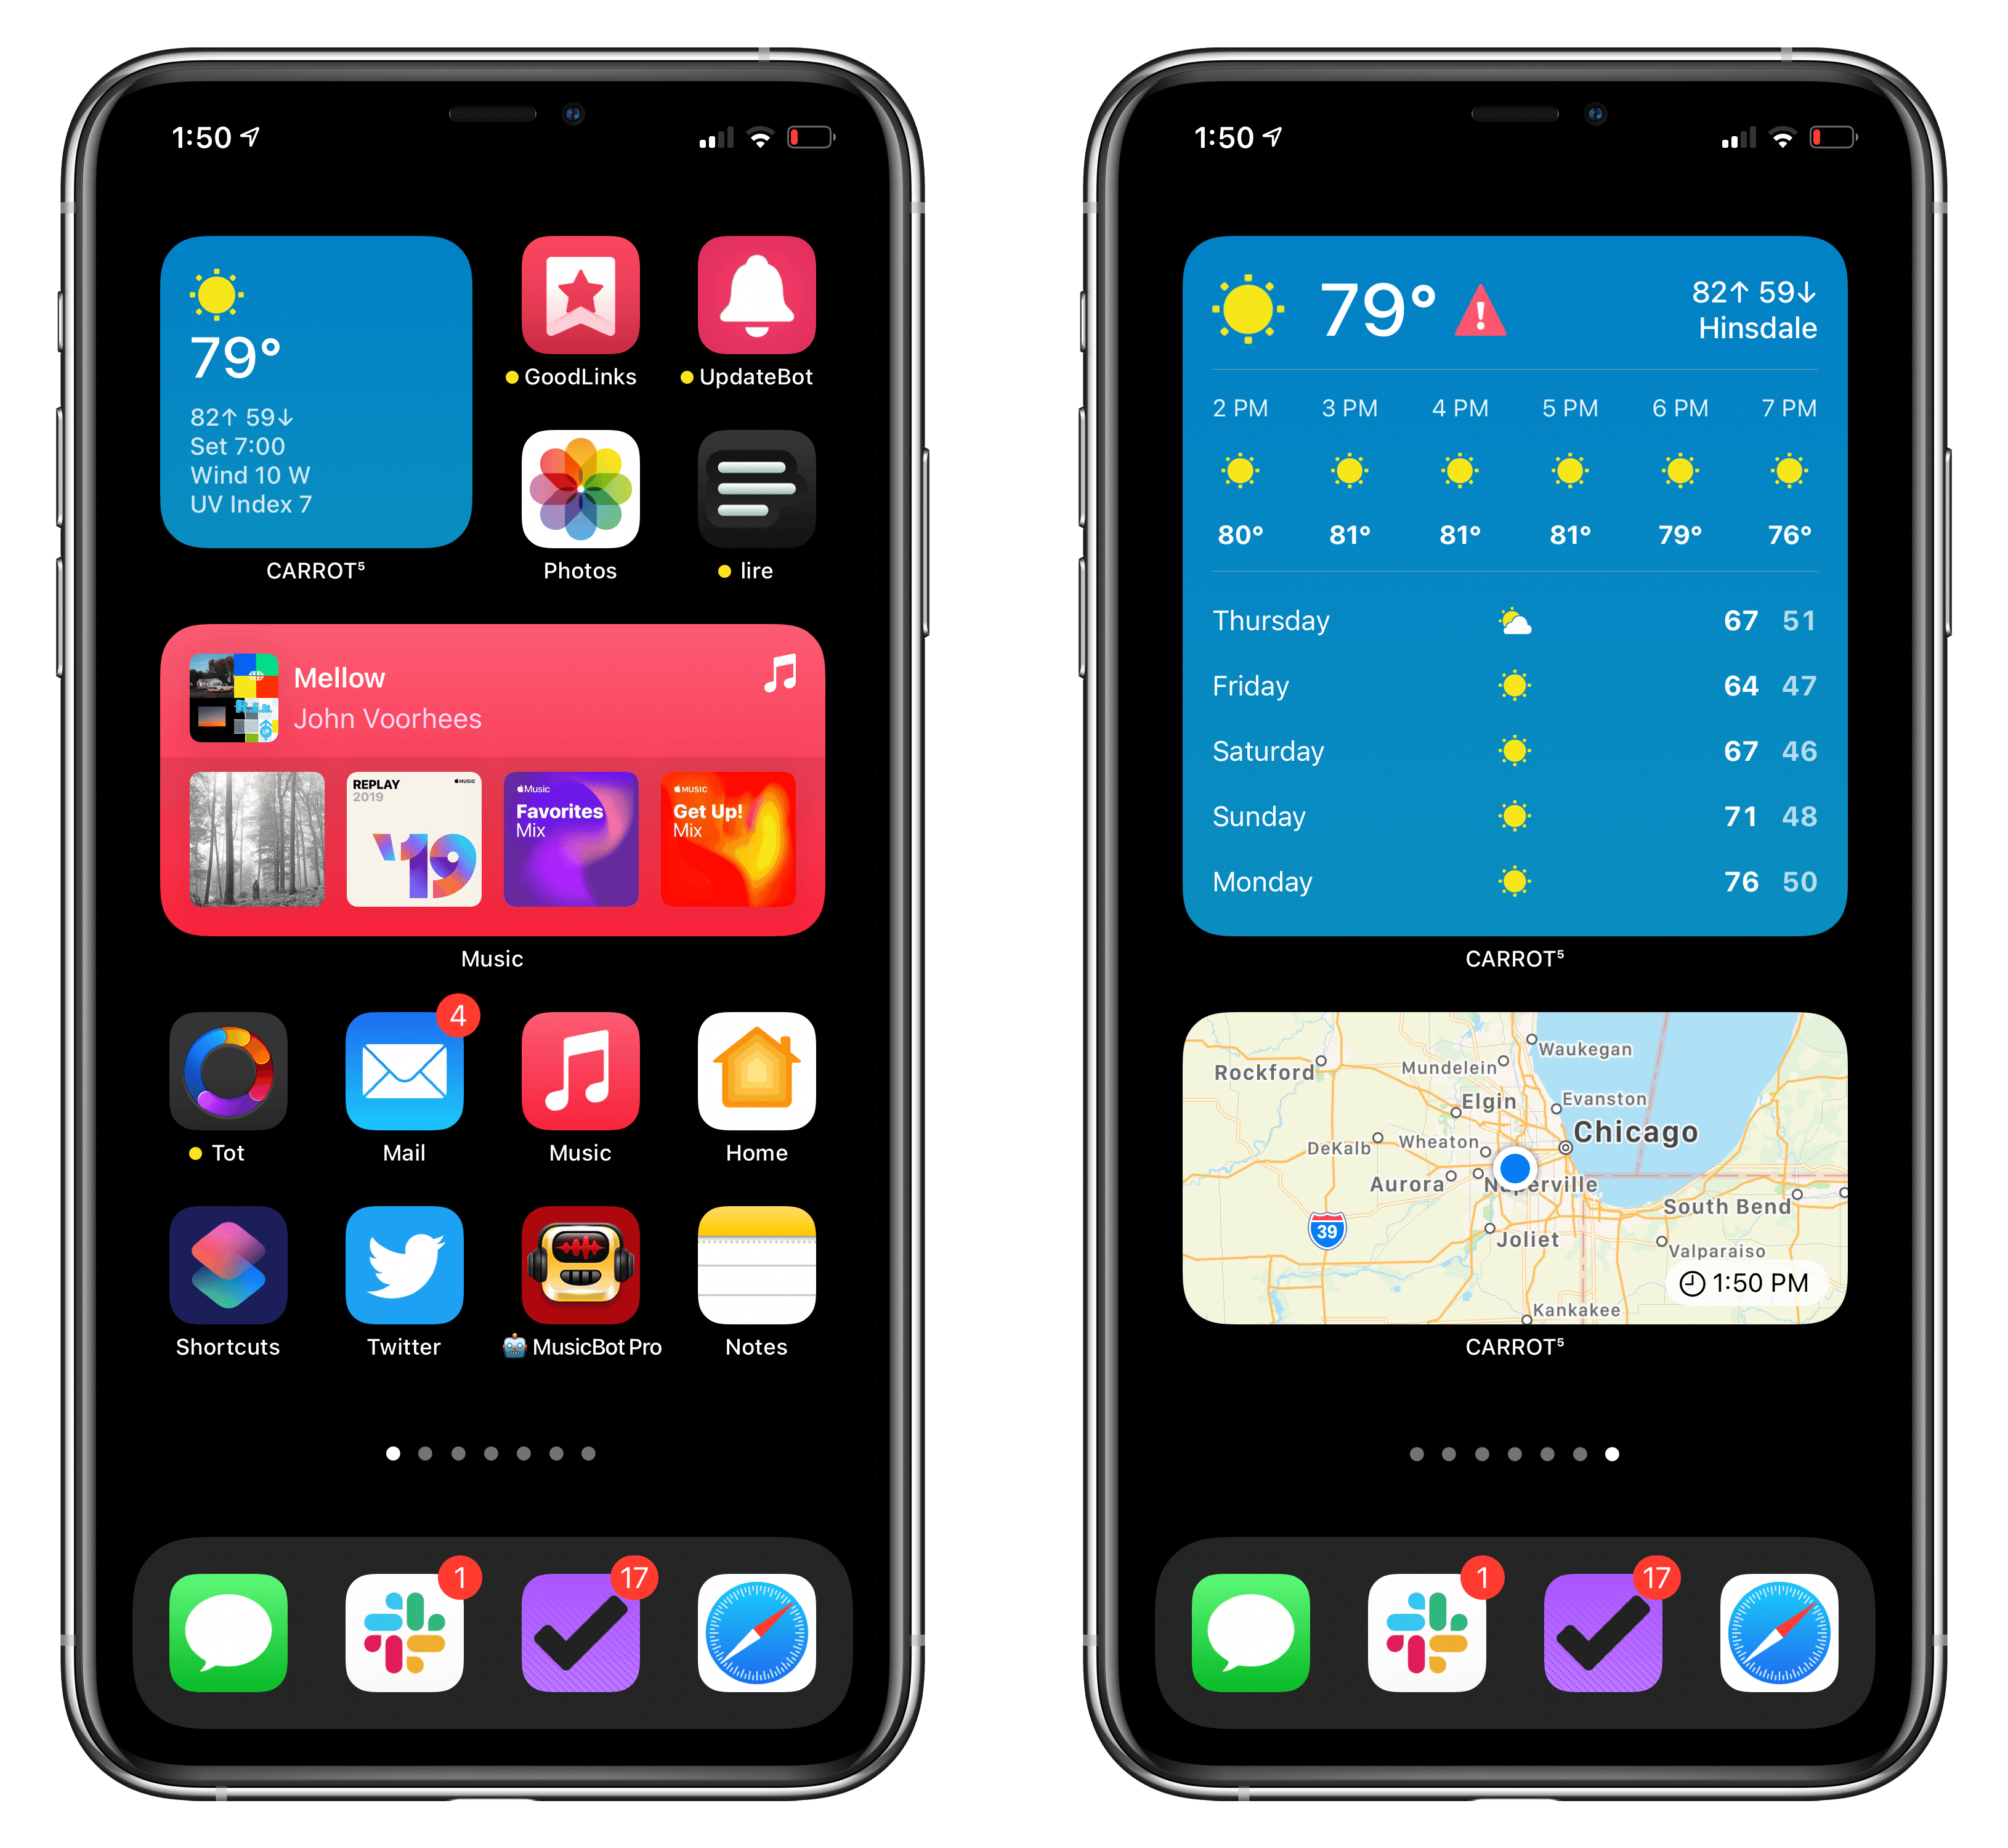 I'm currently using a small CARROT widget on my first Home screen and the large Forecast and medium Weather Map widget on a dedicated weather page.